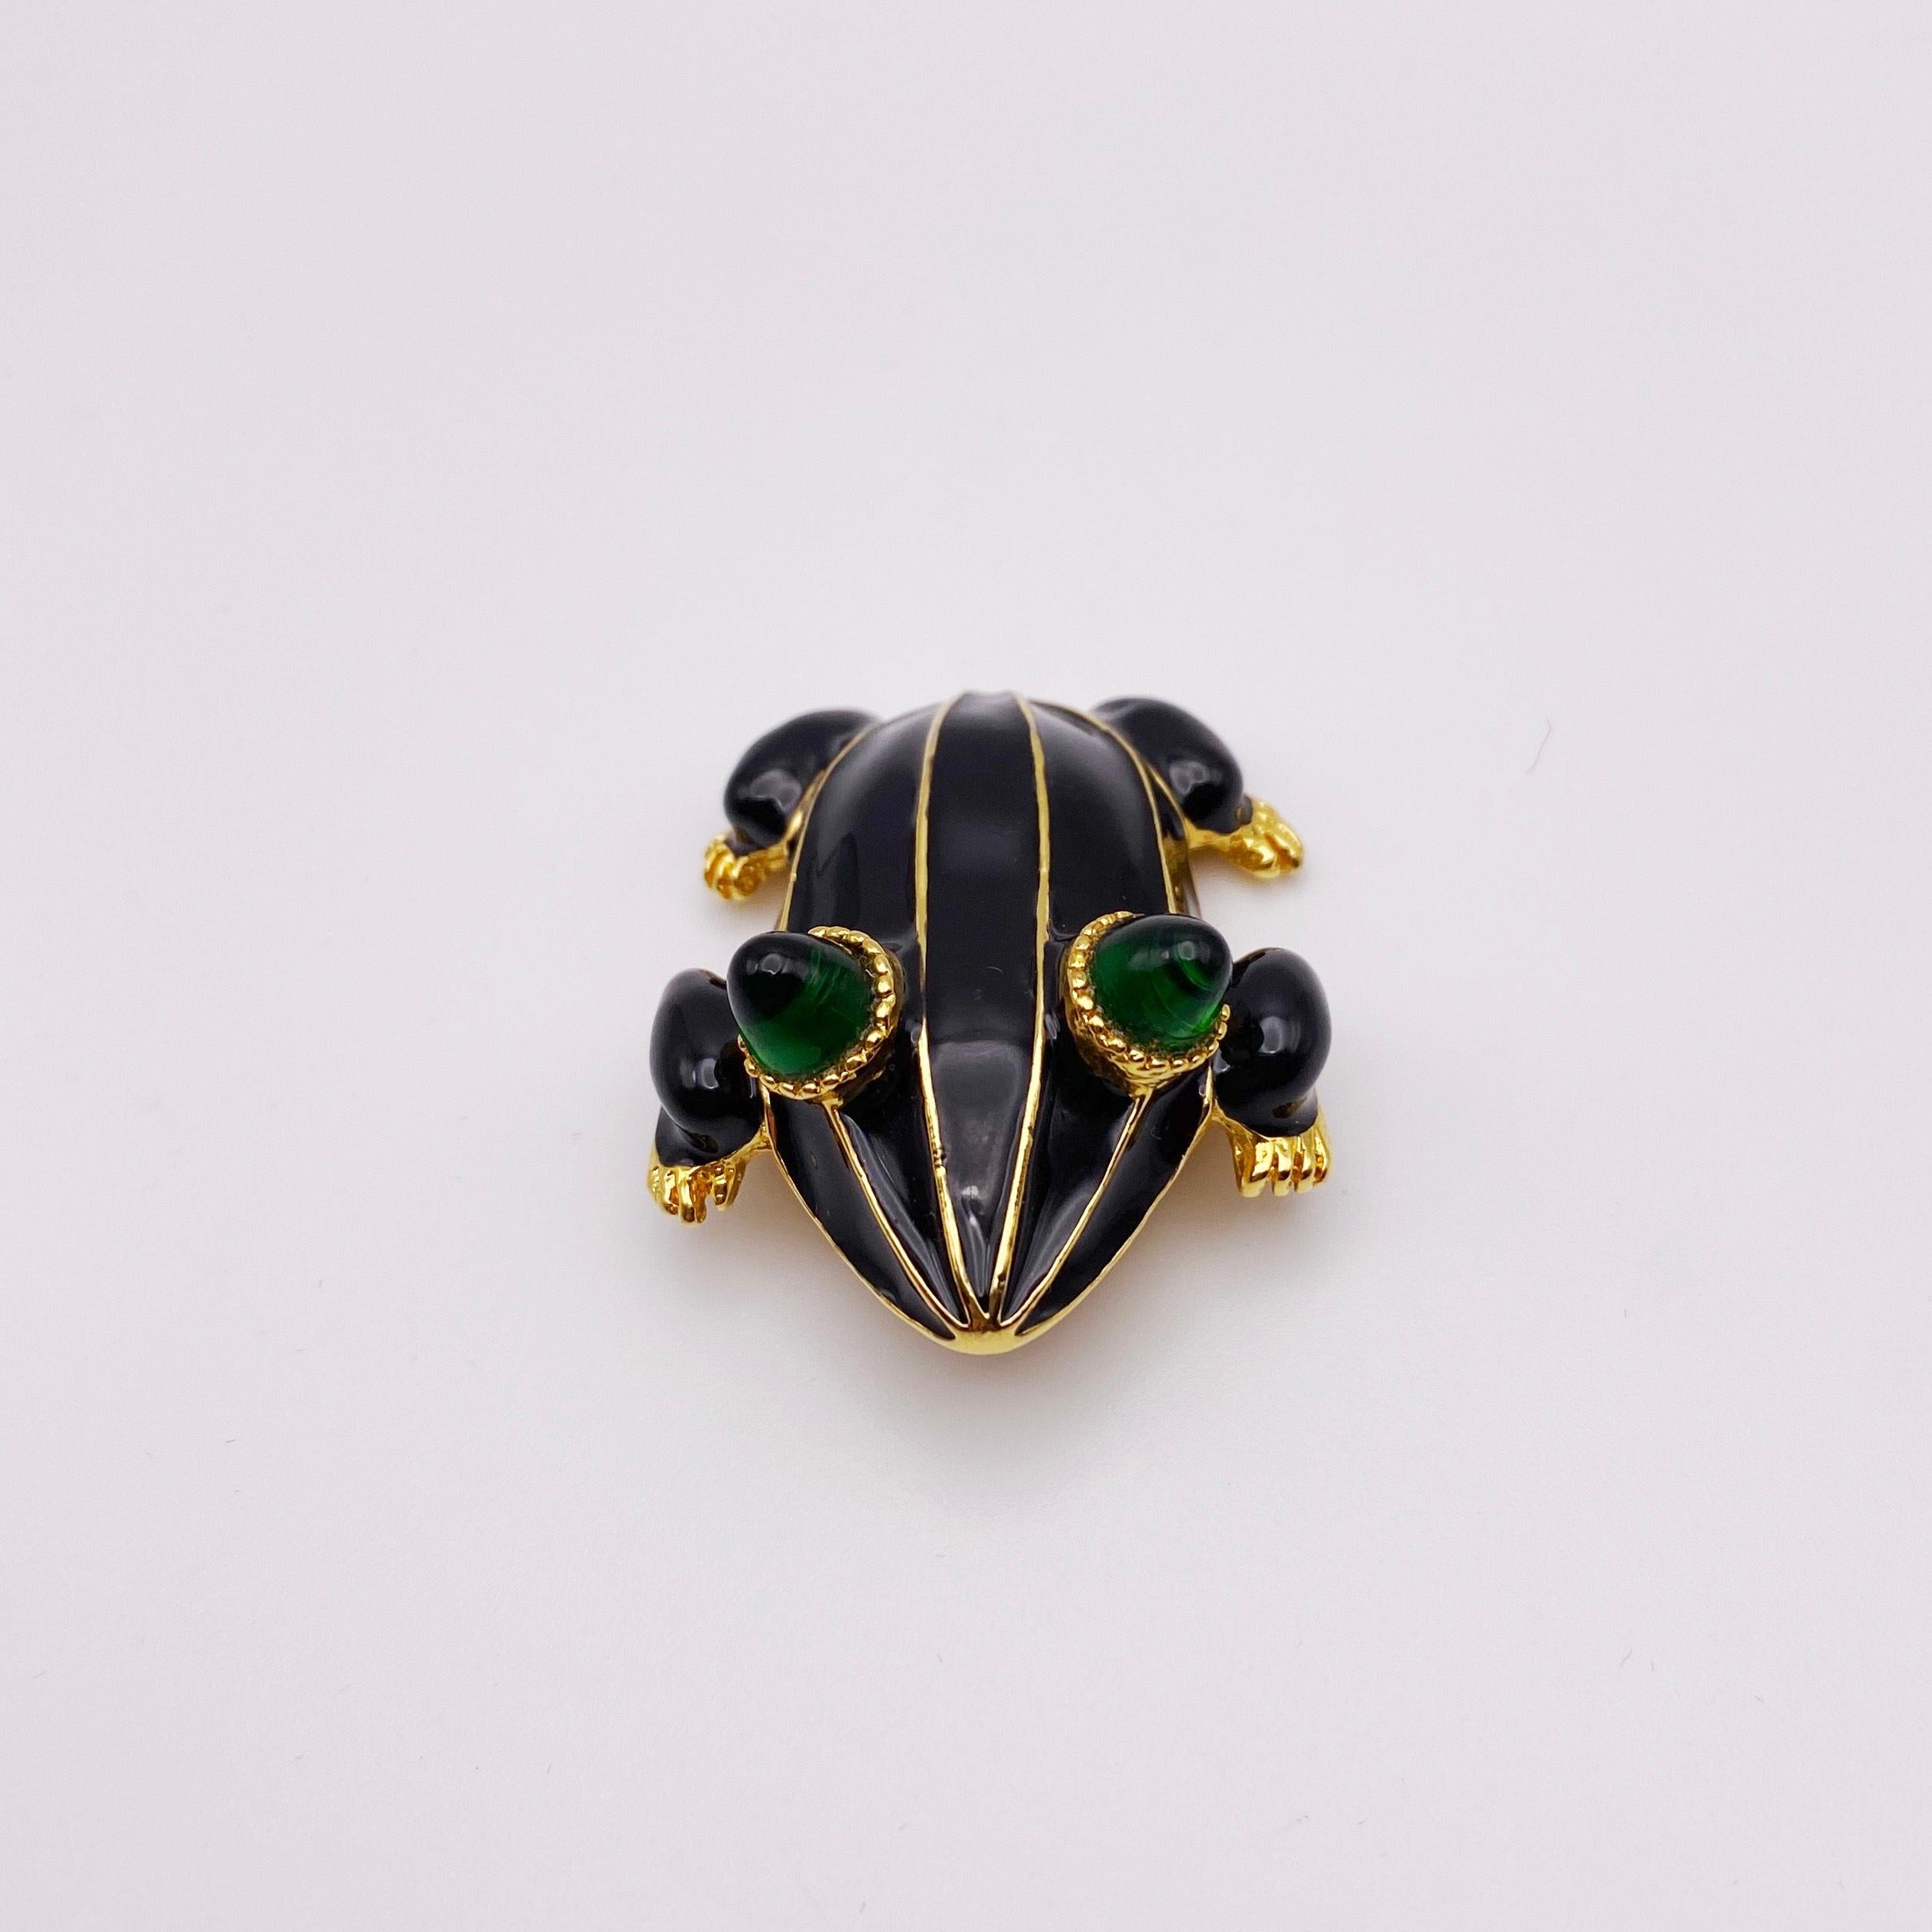 Circa 1990s. A striking black enamel and emerald glass eye frog brooch by legendary designer, Kenneth Lane. Gold plated. Excellent condition. A beautiful gift or treat for yourself! 